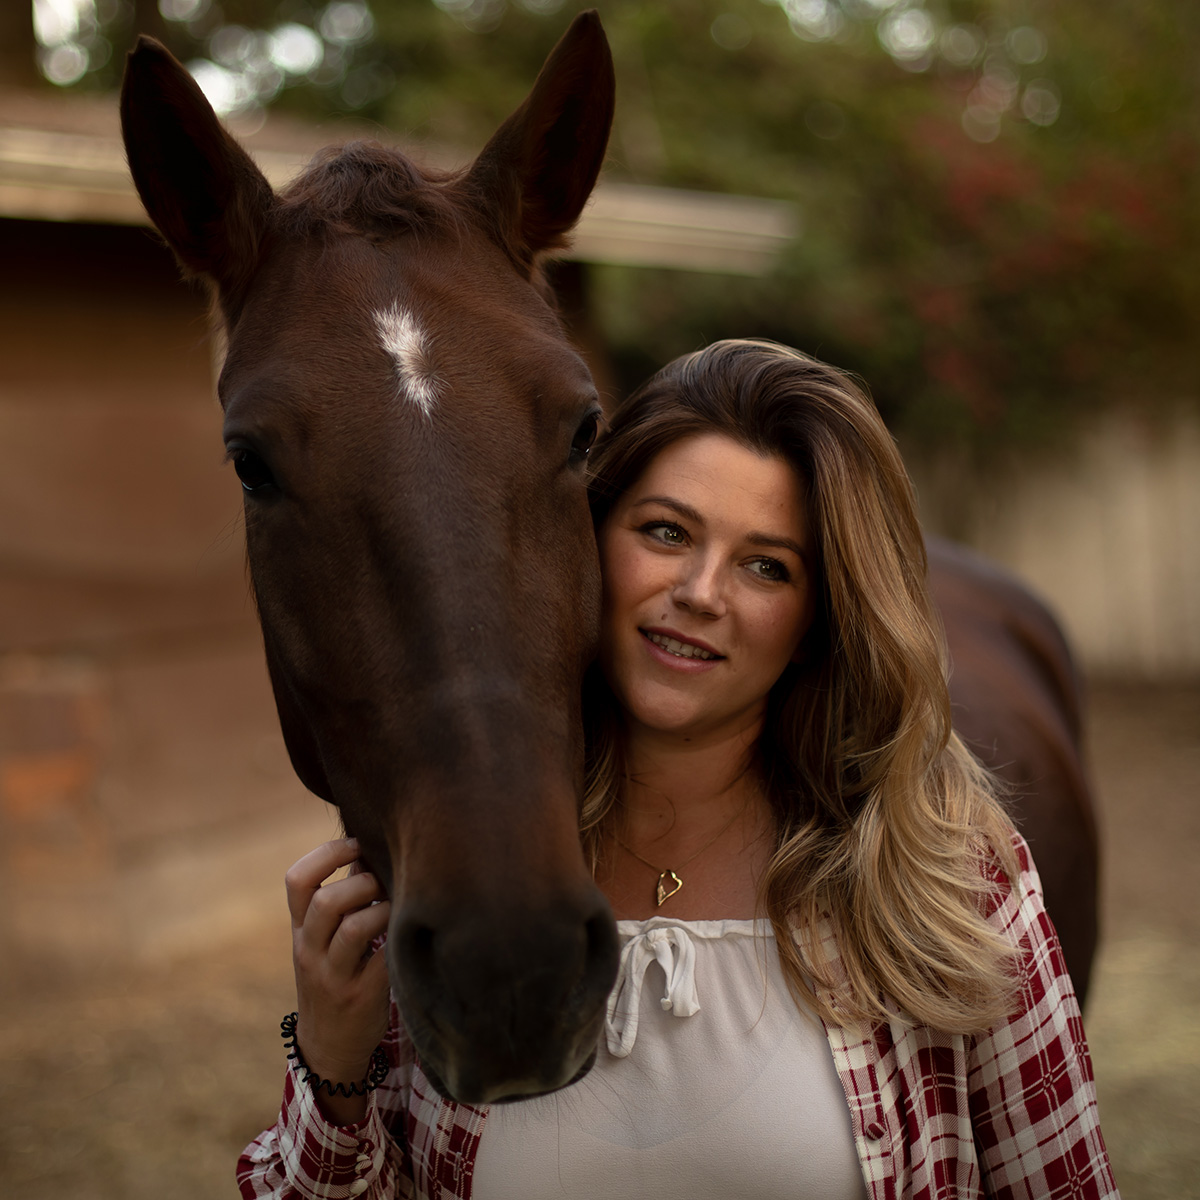 Jessica Andrews, founder of Eques Pante, and her horse